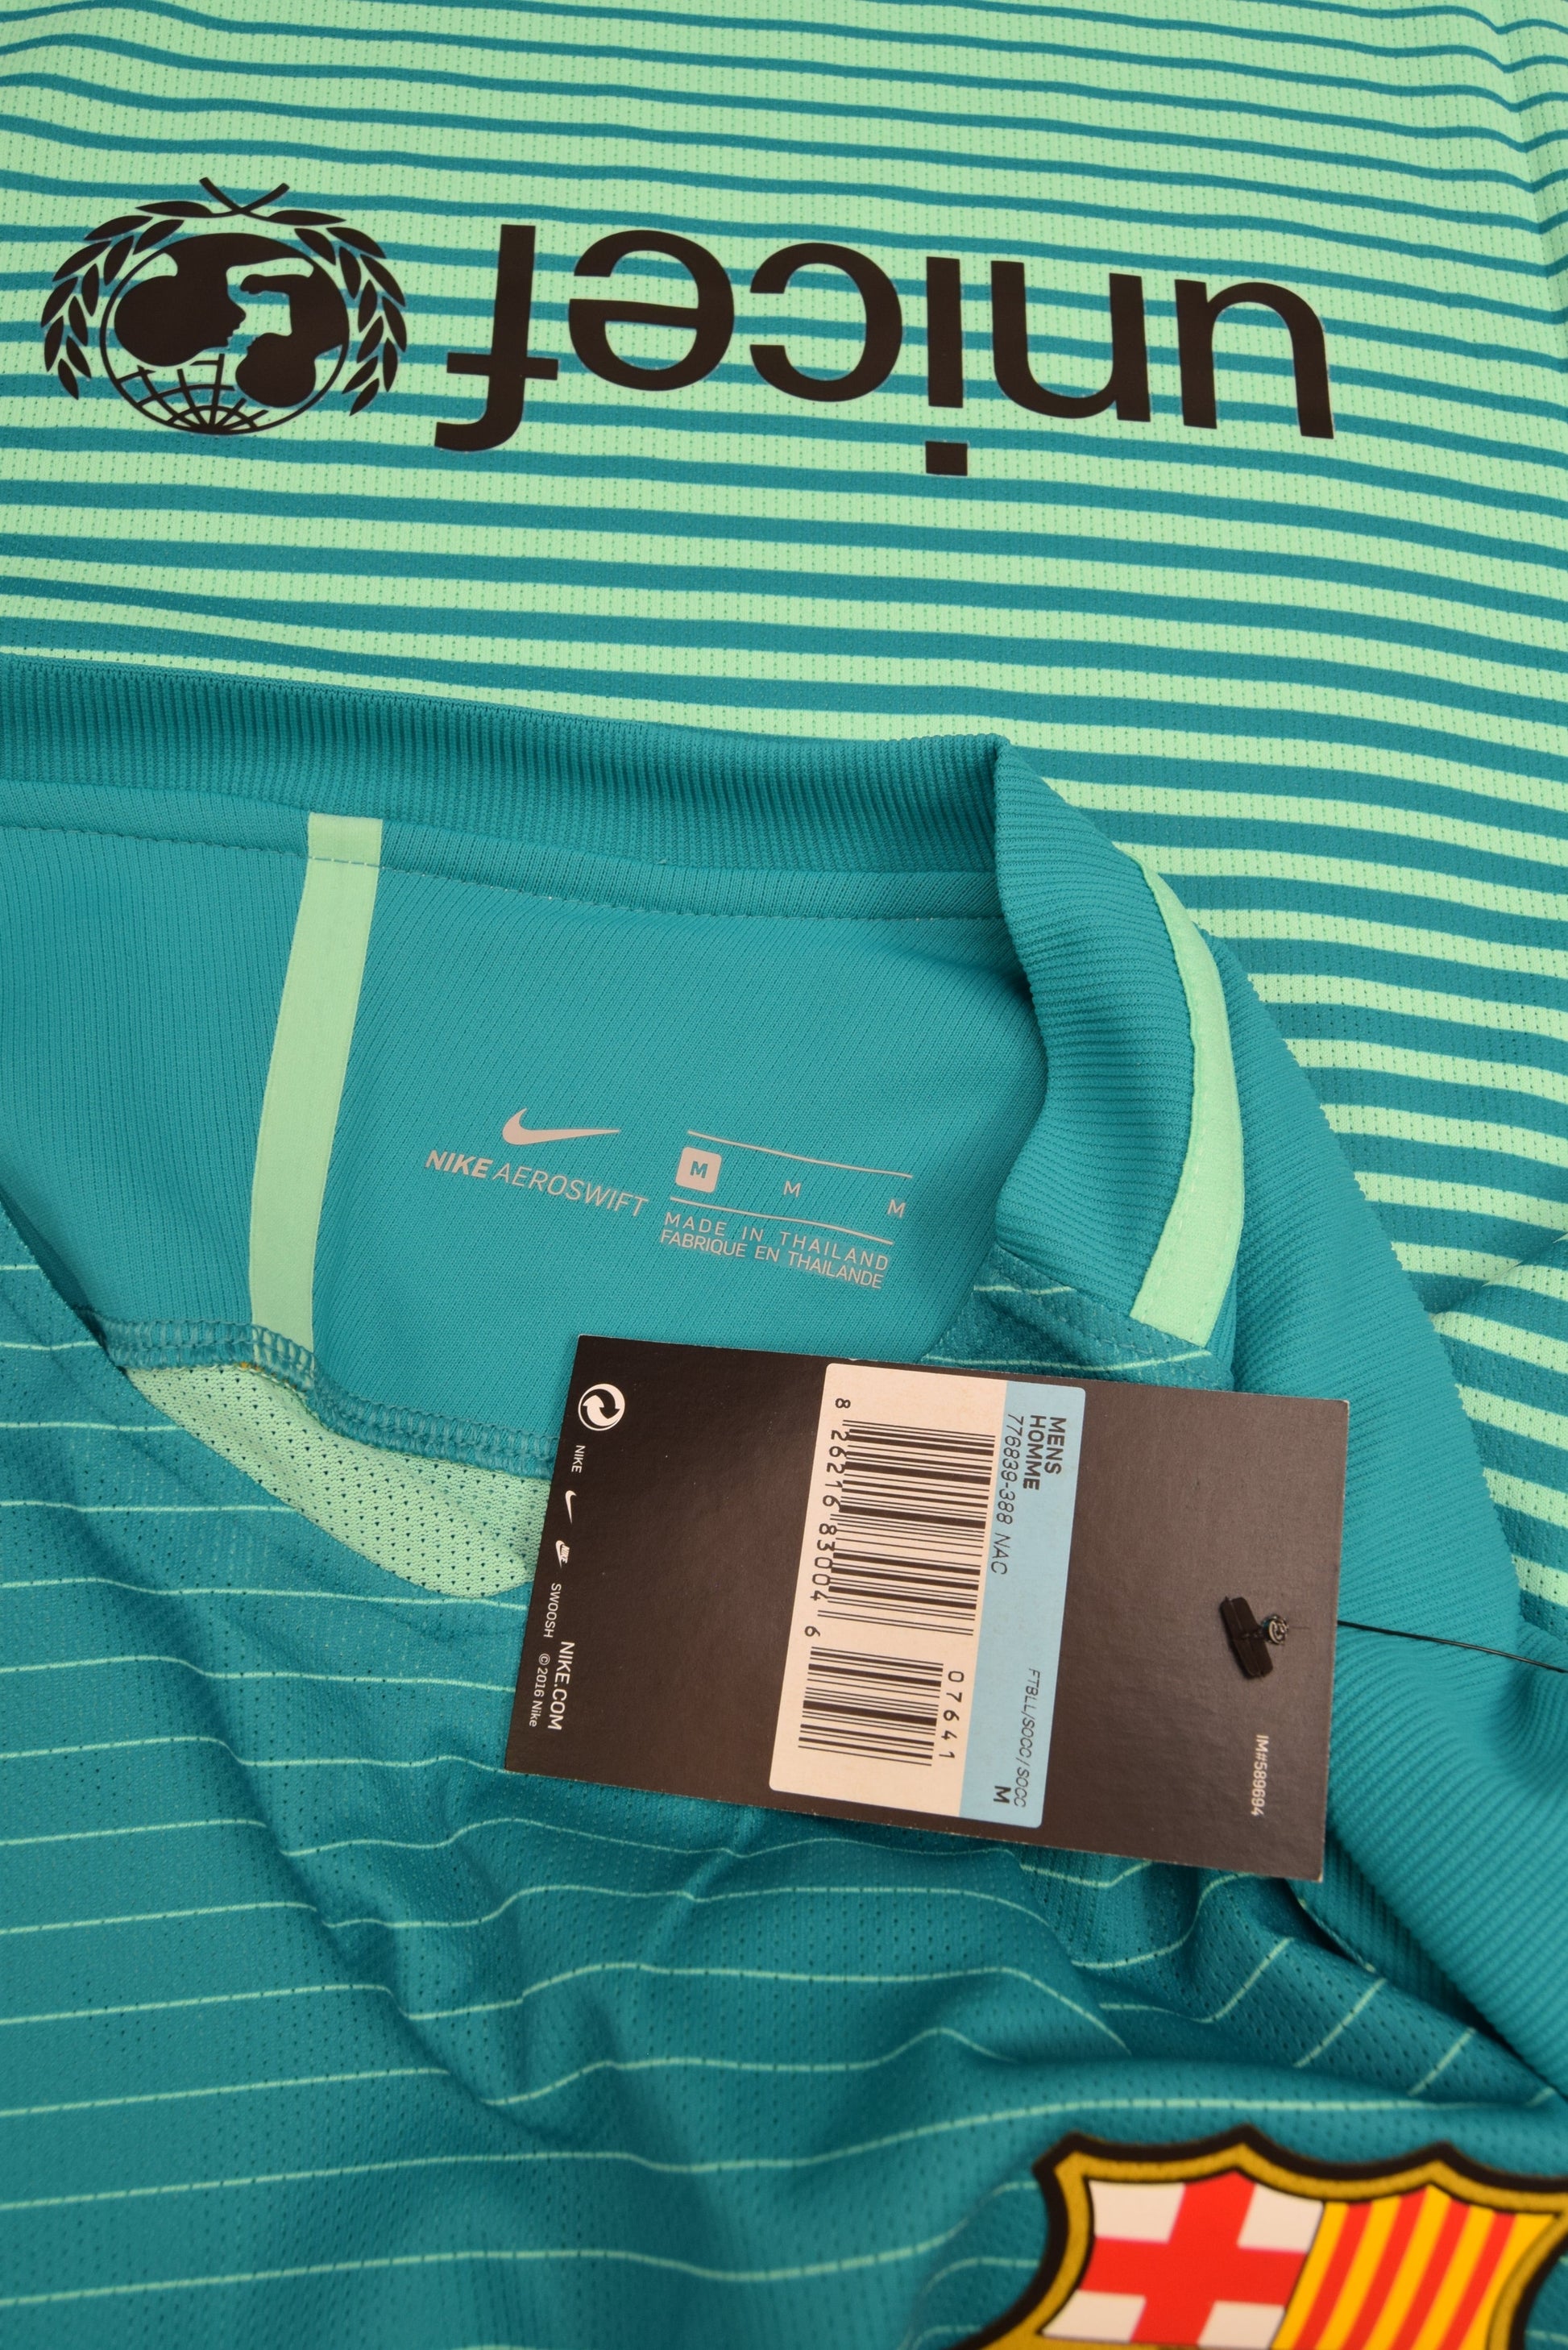 Authentic New Barcelona Nike Aeroswift 2016 - 2017 Player's Edition / Issue Away Third Football Shirt Size M BNWT Deadstock Unicef Teal Mint Green